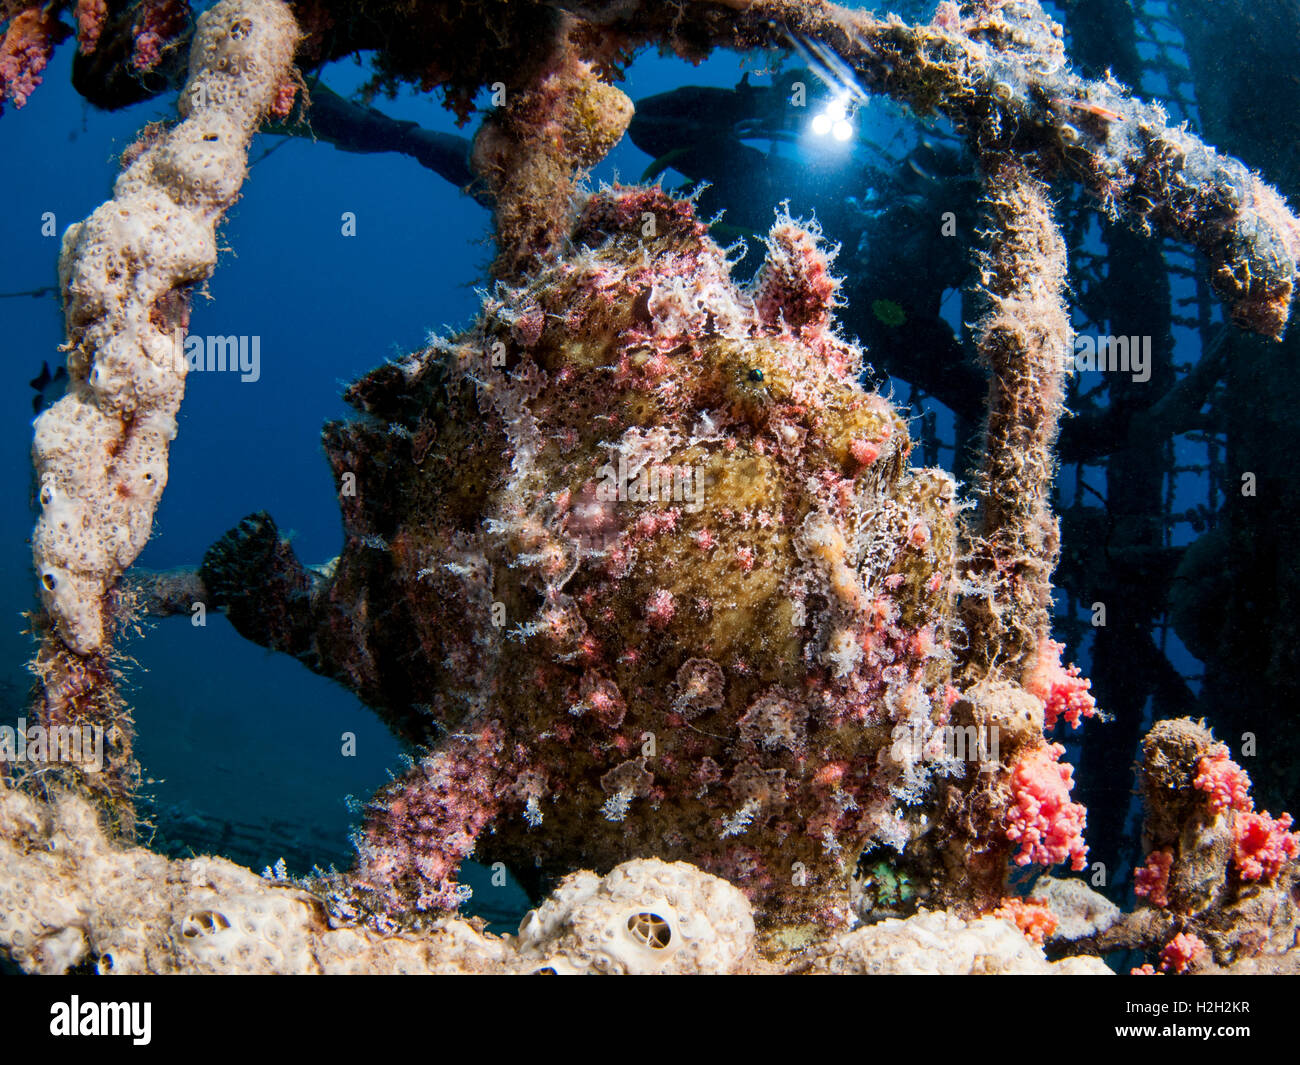 Frogfish (Antennarius sp.) hidden amongst coral. The colouration of the frogfish provides it with camouflage against predators a Stock Photo